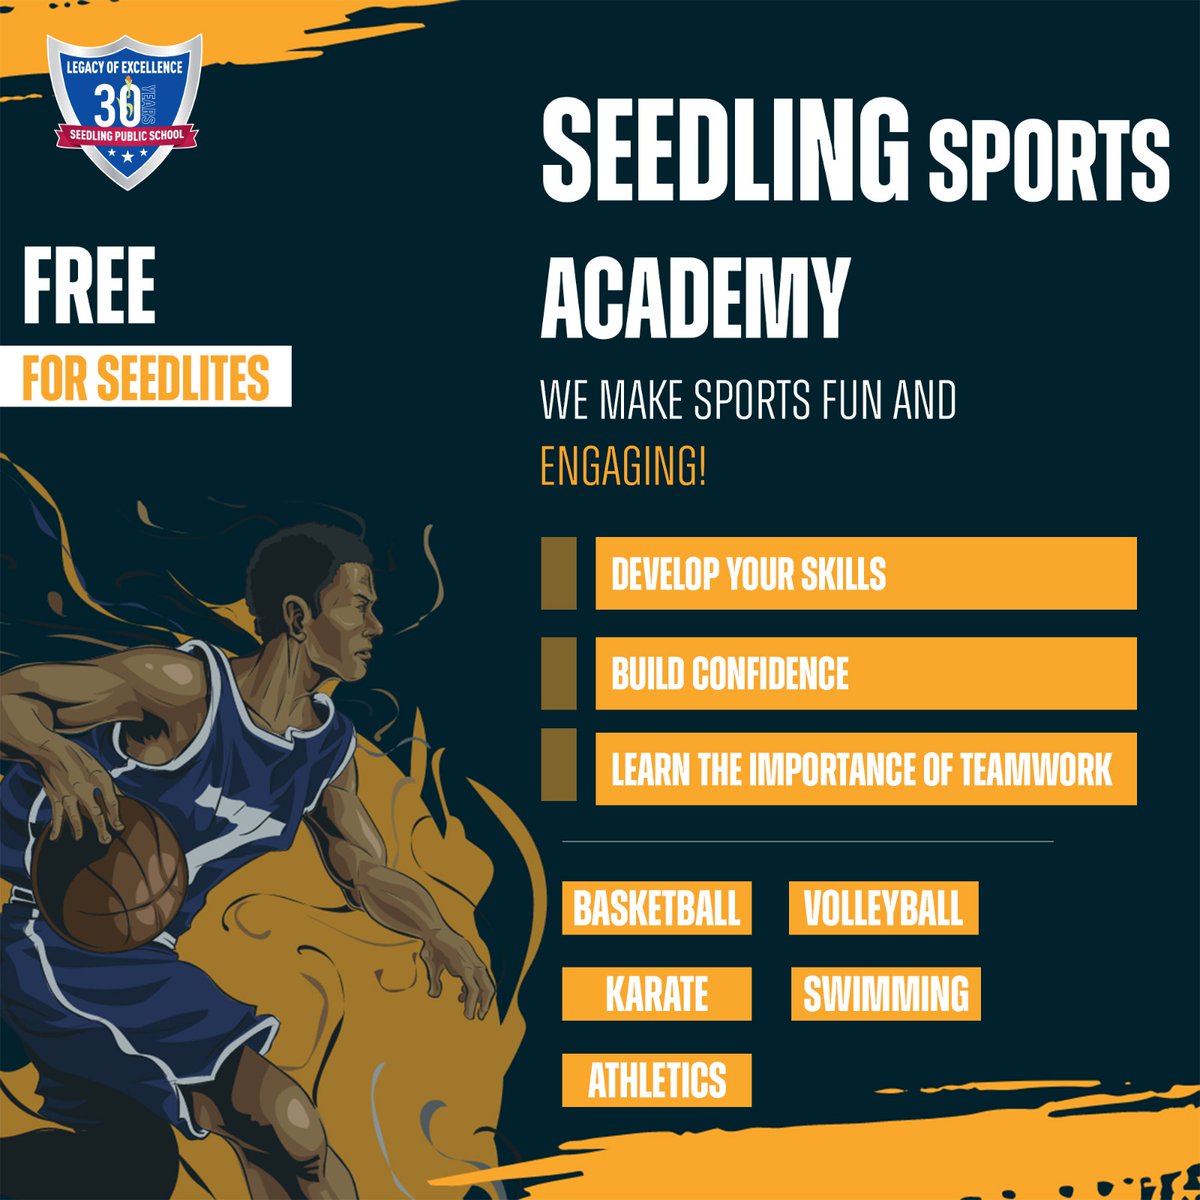 Seedling Sports Academy: Where every game is an adventure! 🏀🏐🥋 
From basketball hoops to karate chops, we've got it all covered. Enroll now and unleash your athletic potential! 

Enroll Today.
seedlingschools.com/admission-proc…

#SeedlingSports #SportsAcademy #EnrollNow